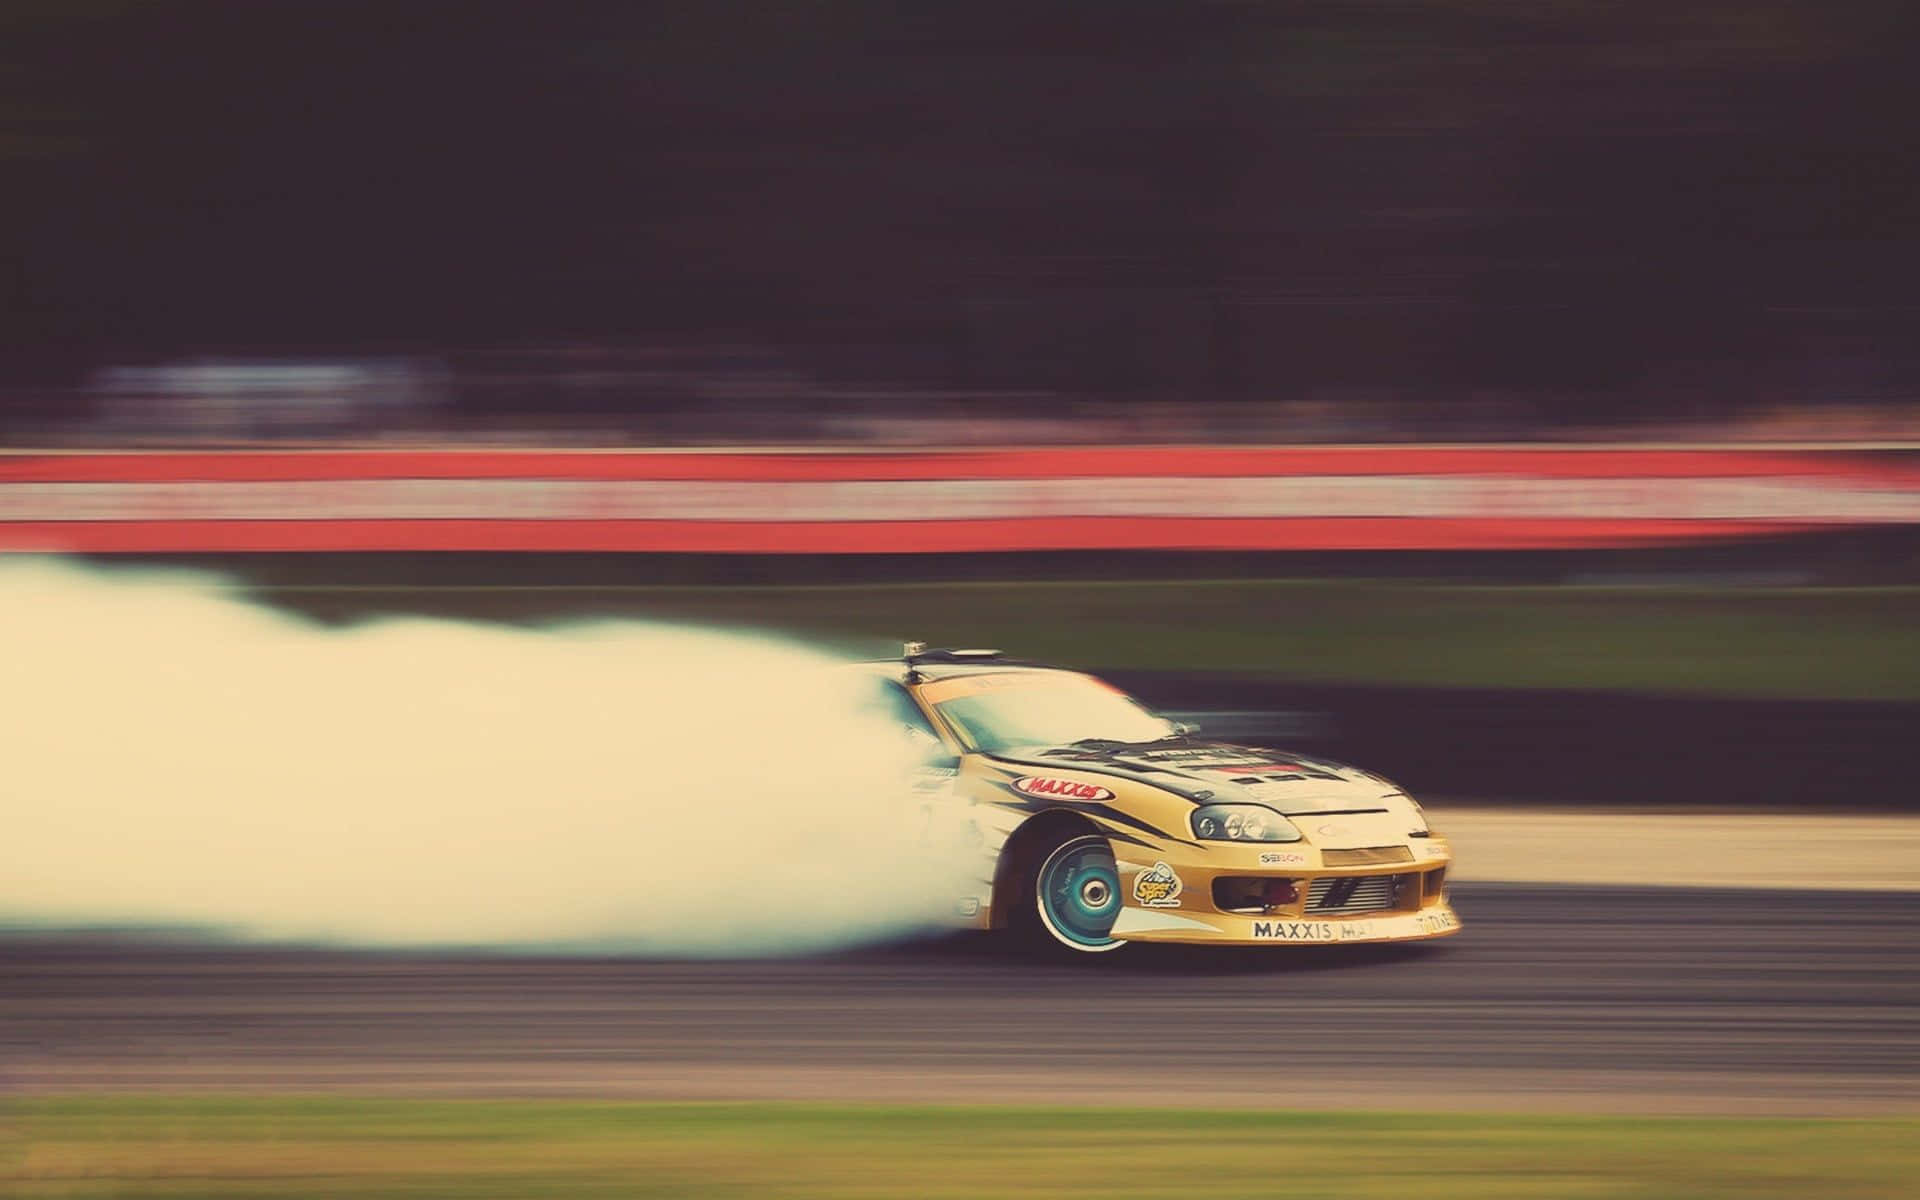 "Ride Like the Wind with the Supra Drift" Wallpaper